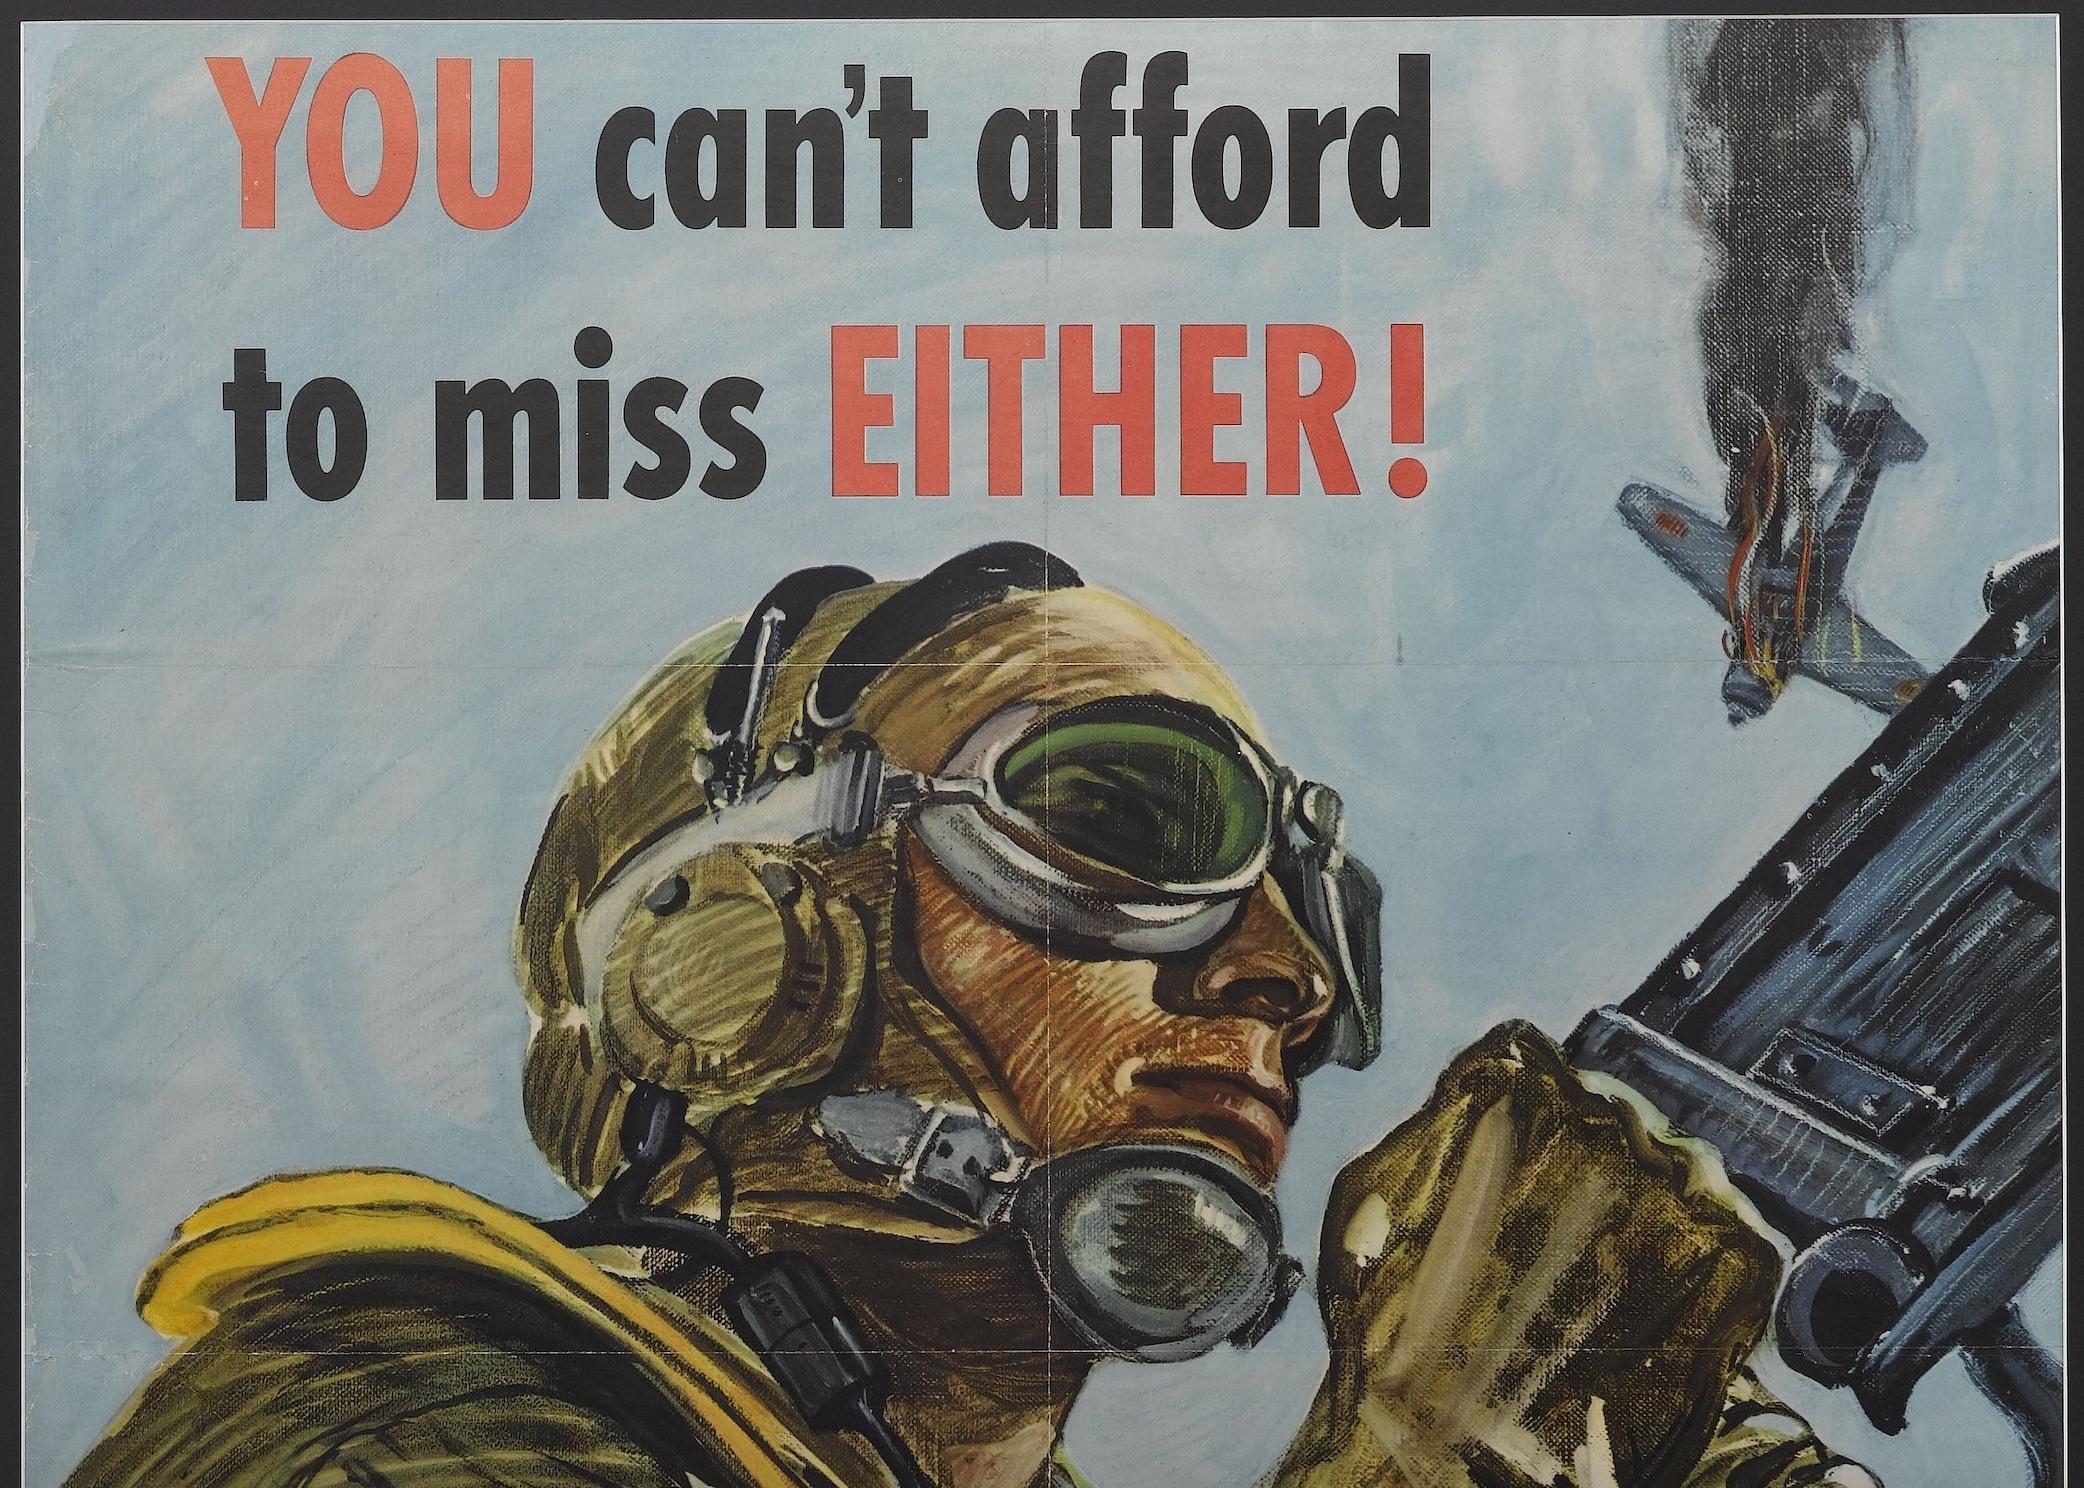 Details about   “You Can’t Afford To Miss Either!” 1944 Vintage Style WW2 War Poster 18x24 